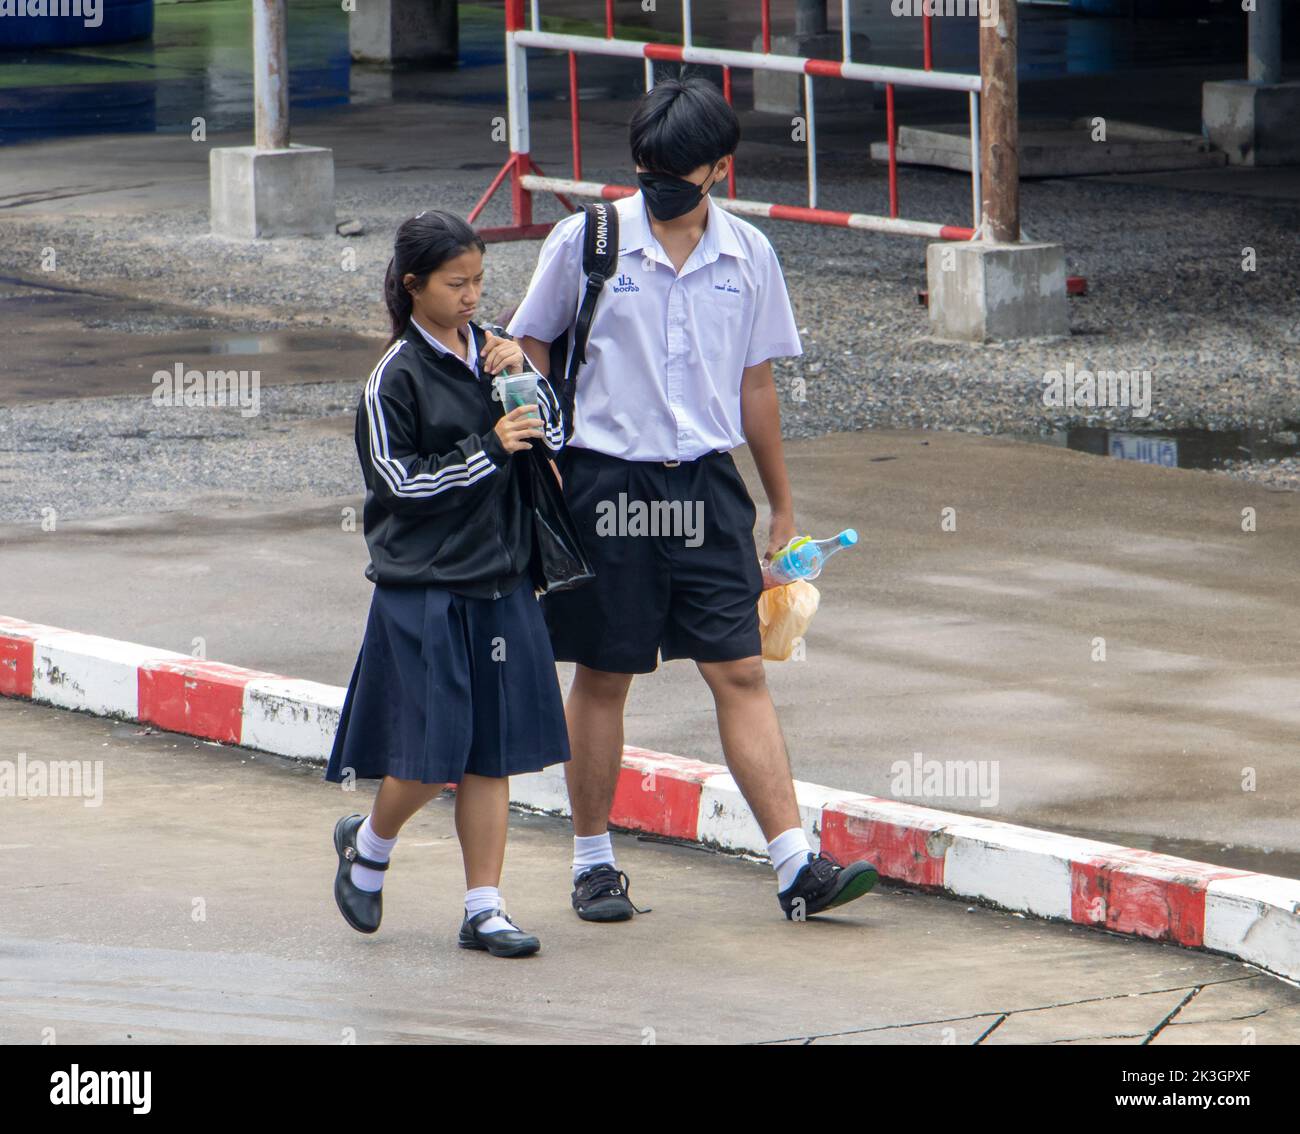 SAMUT PRAKAN, THAILAND, SEP 23 2022, A boy and a girl in school uniforms are walking on a wet street Stock Photo